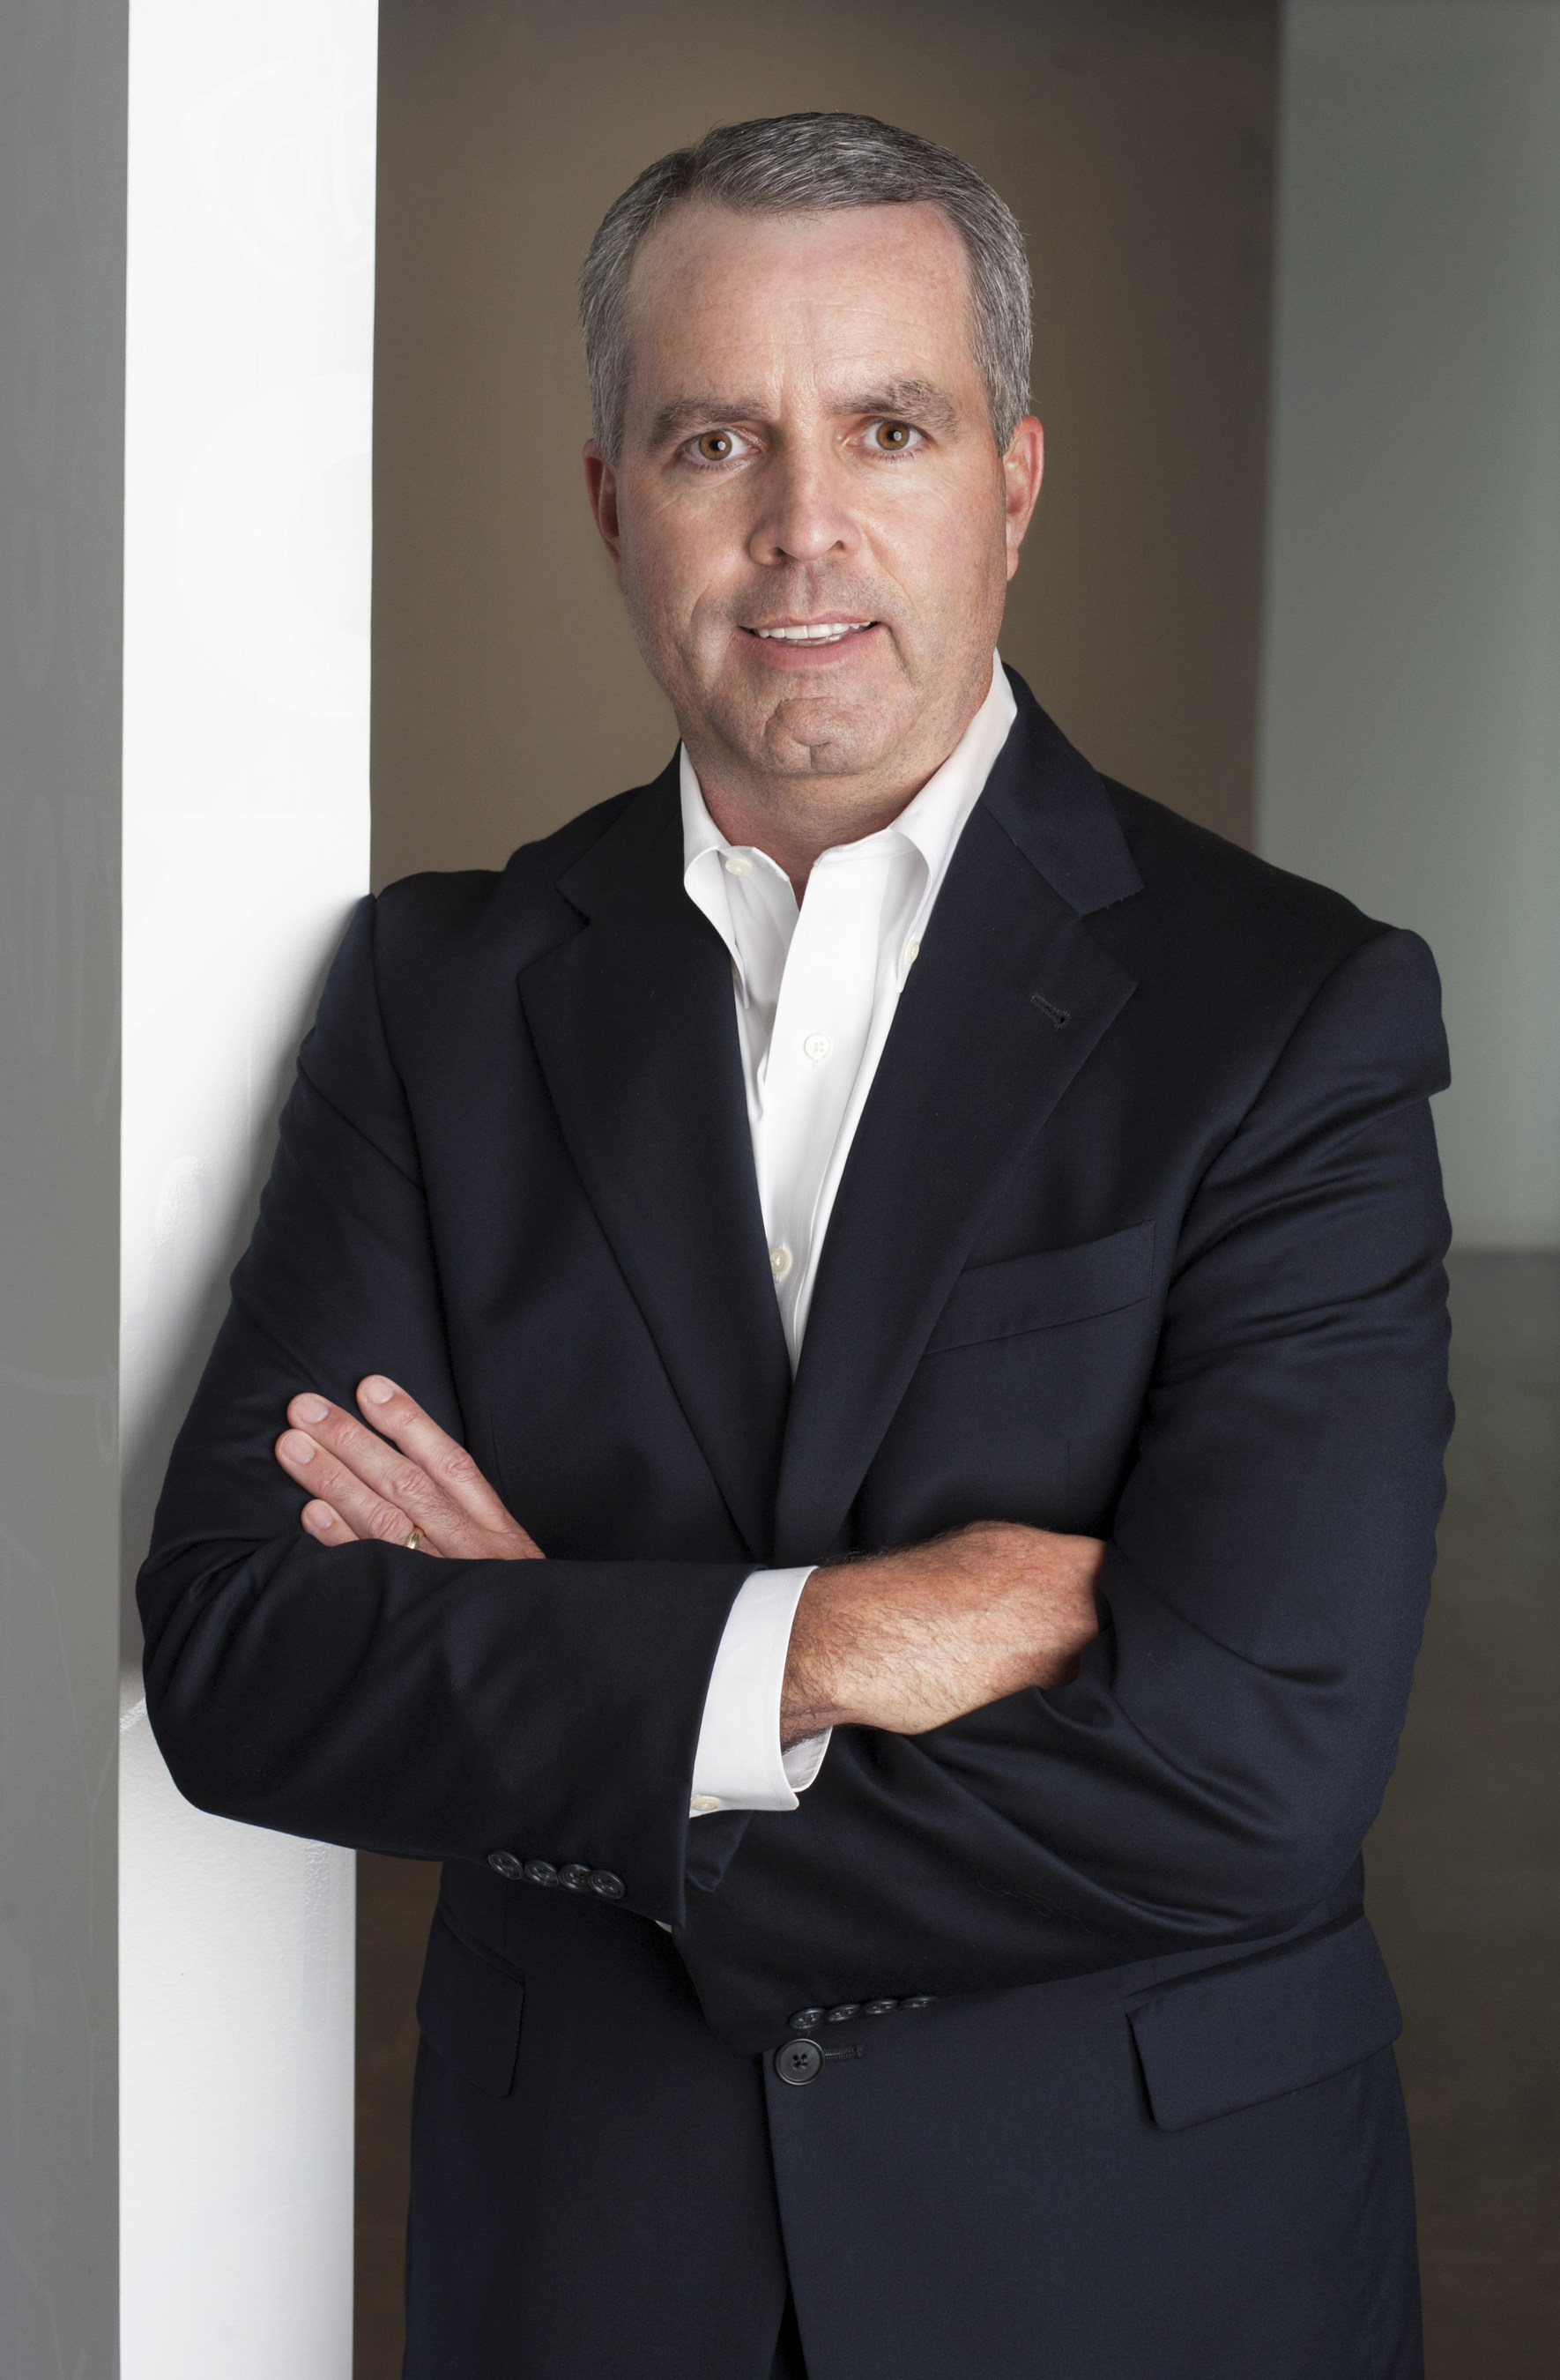 George Cleary, Chief Executive Officer of Iluminage Beauty Inc.